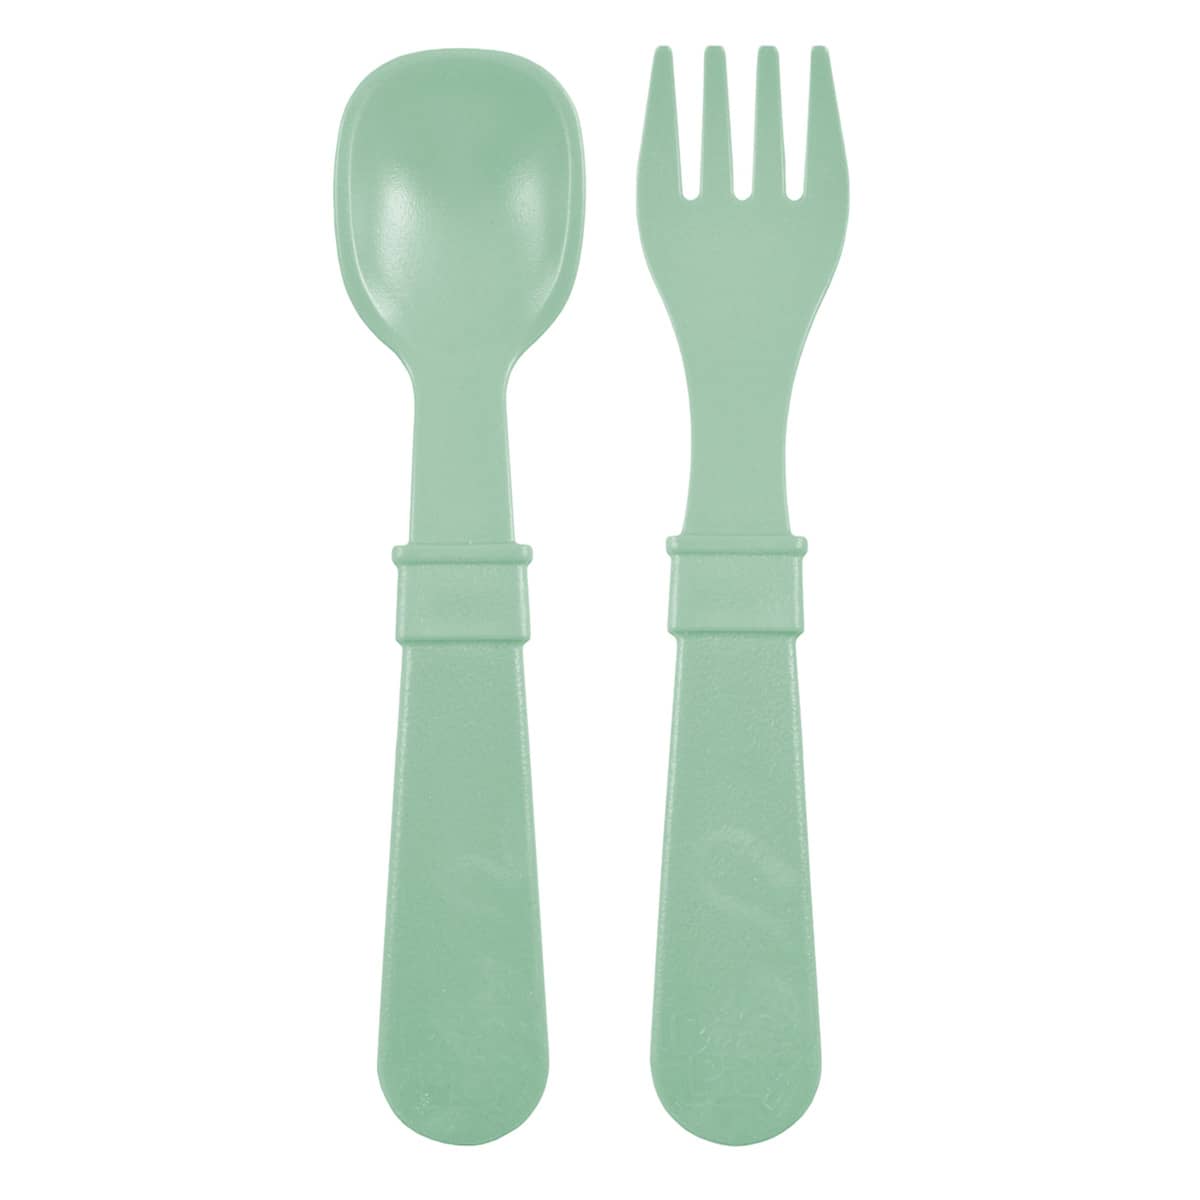 Re-Play Recycled Fork and Spoon Set - Sage